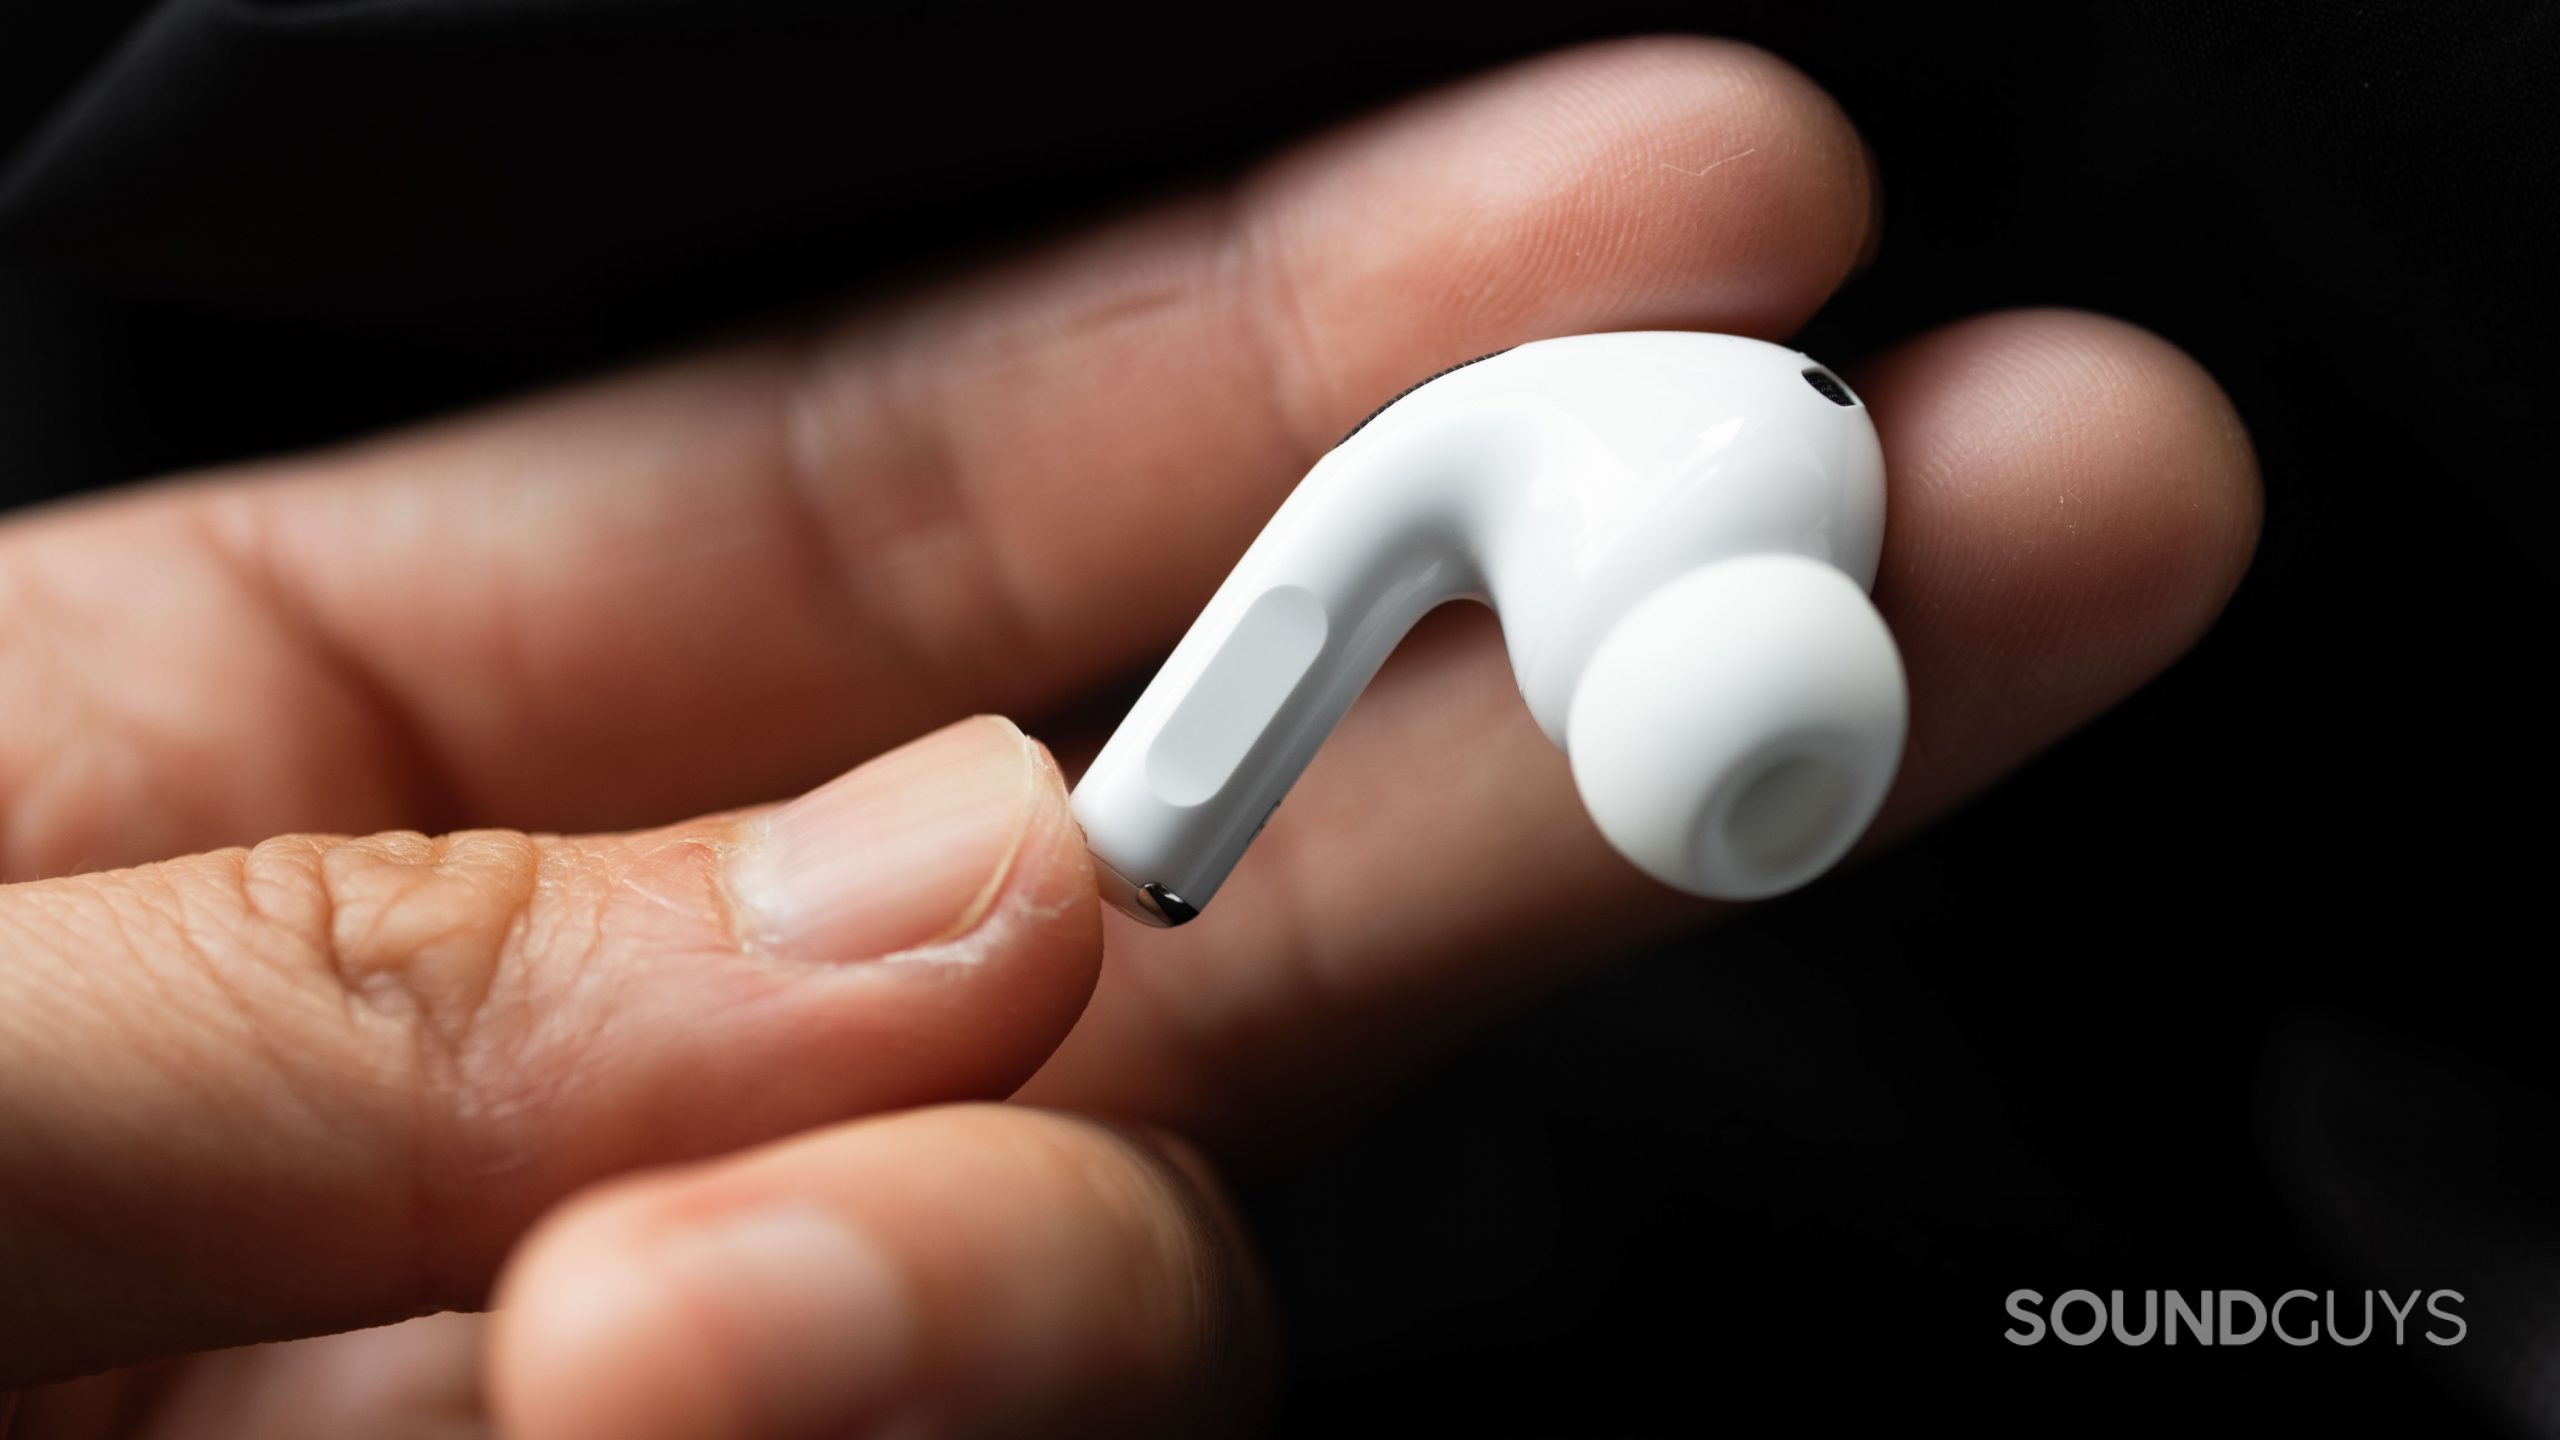 How to set up your Apple AirPods Pro as hearing aids - SoundGuys